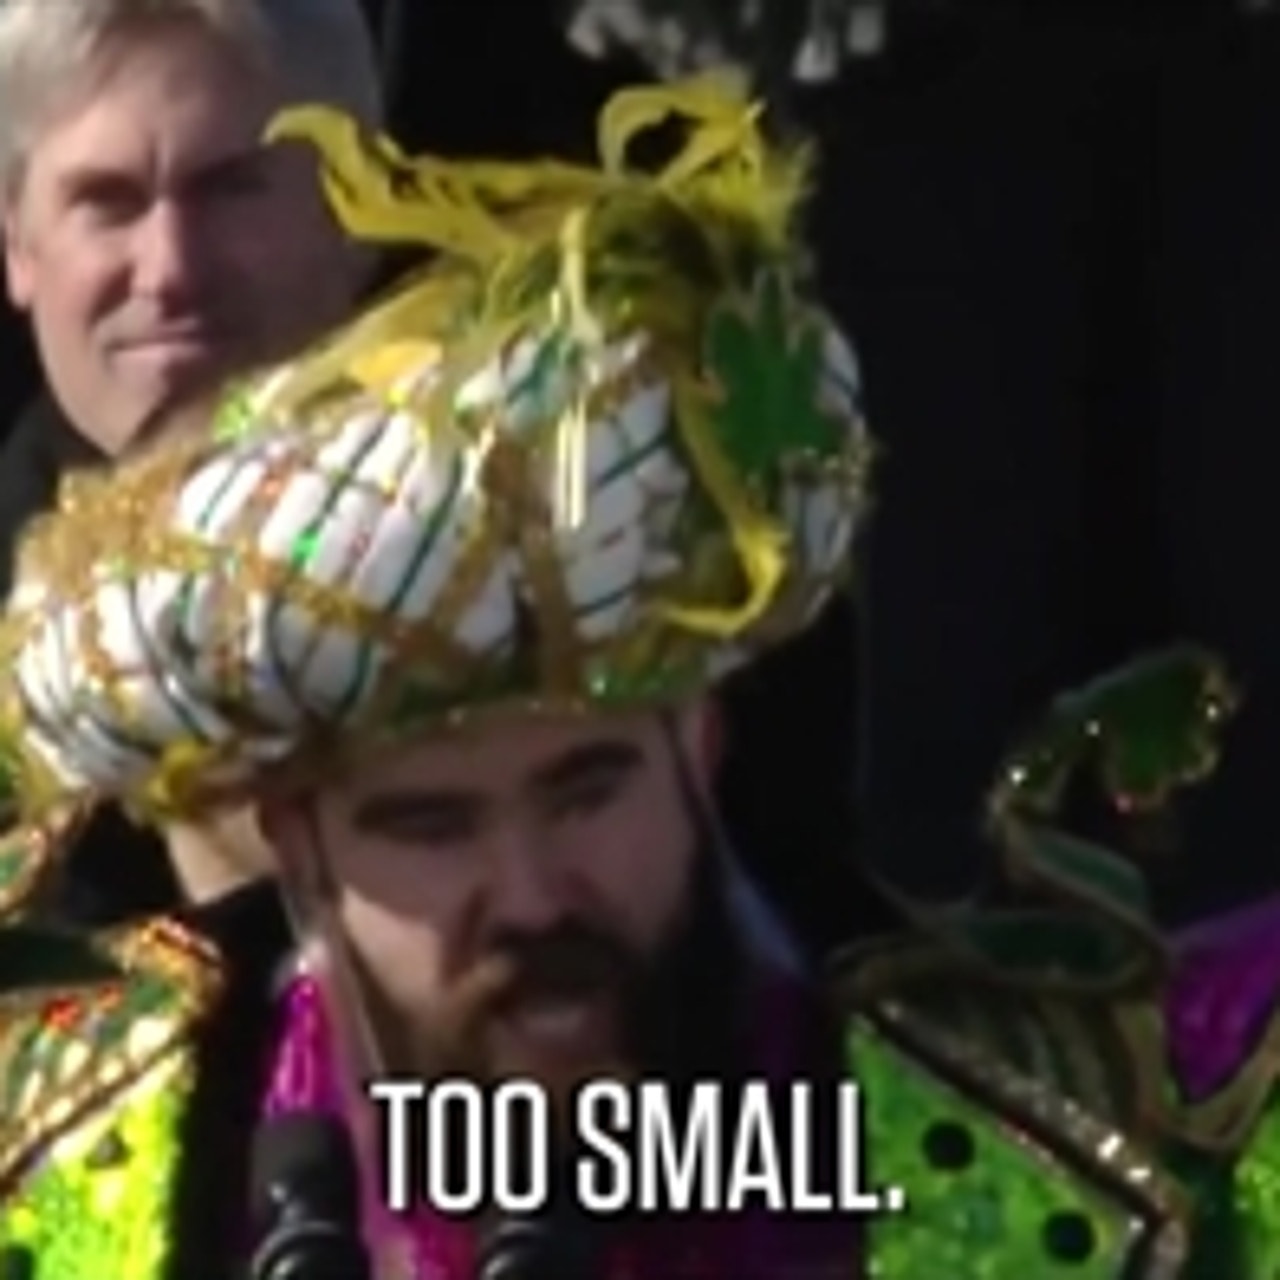 Jason Kelce's Super Bowl parade speech works perfectly for the